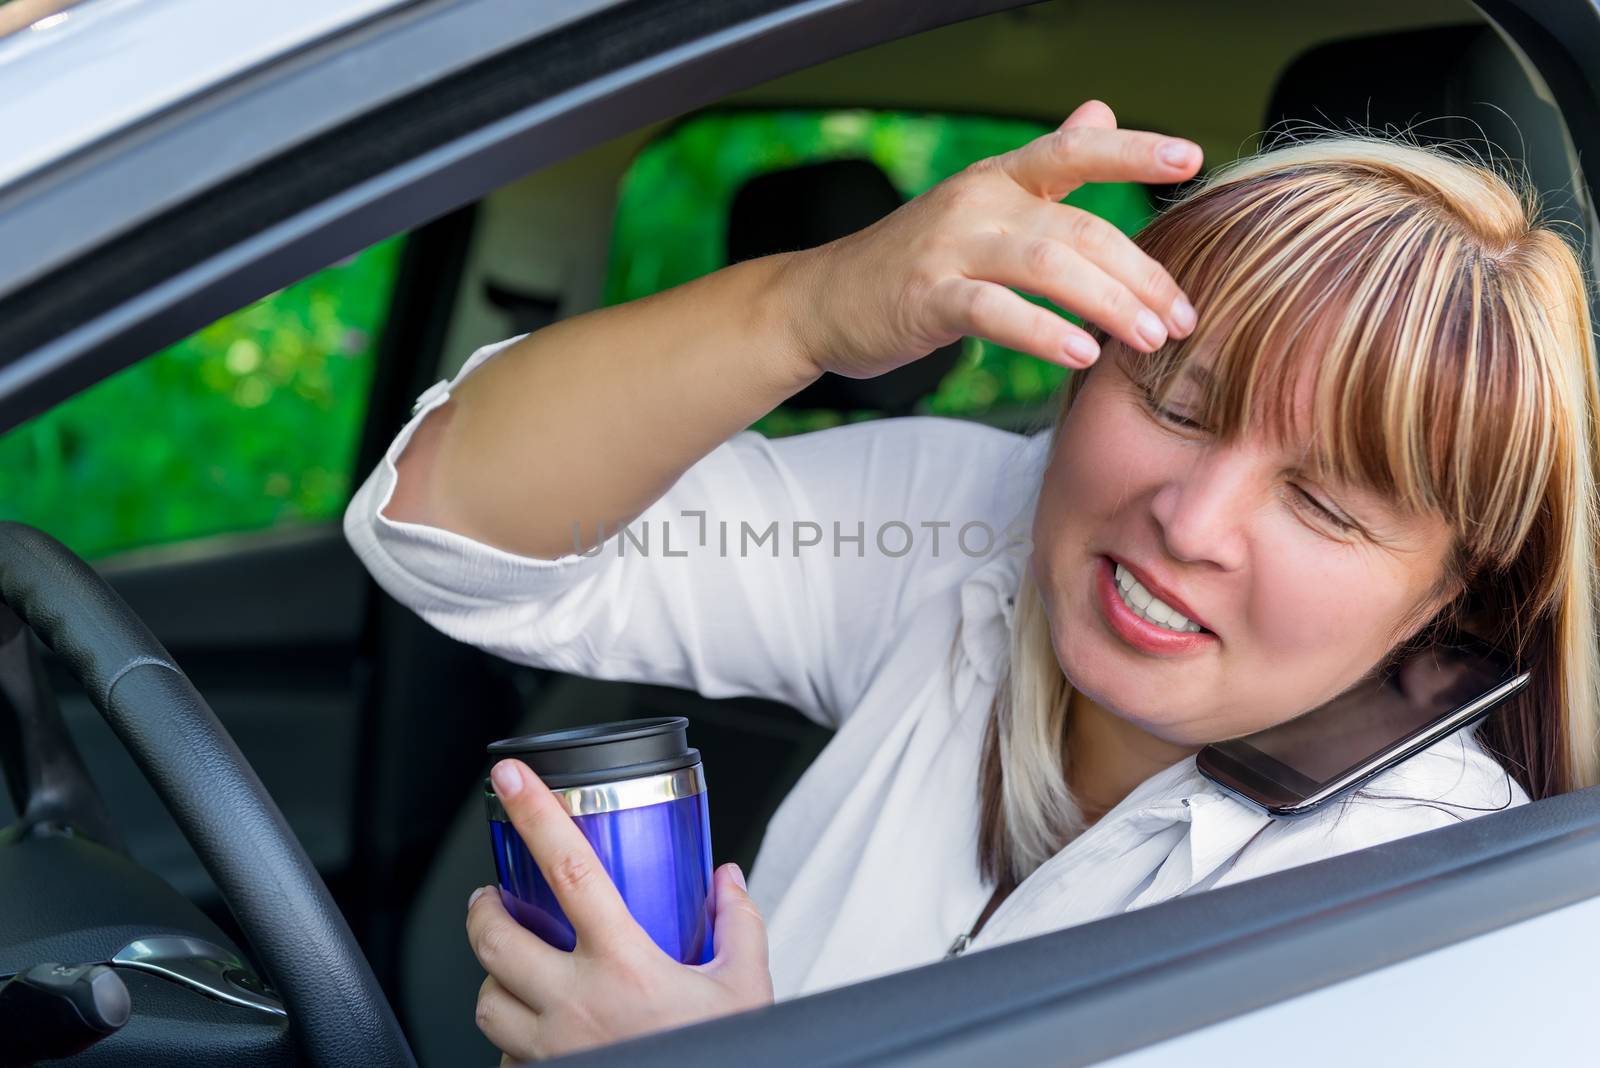 driver with a coffee and phone does not watch the road